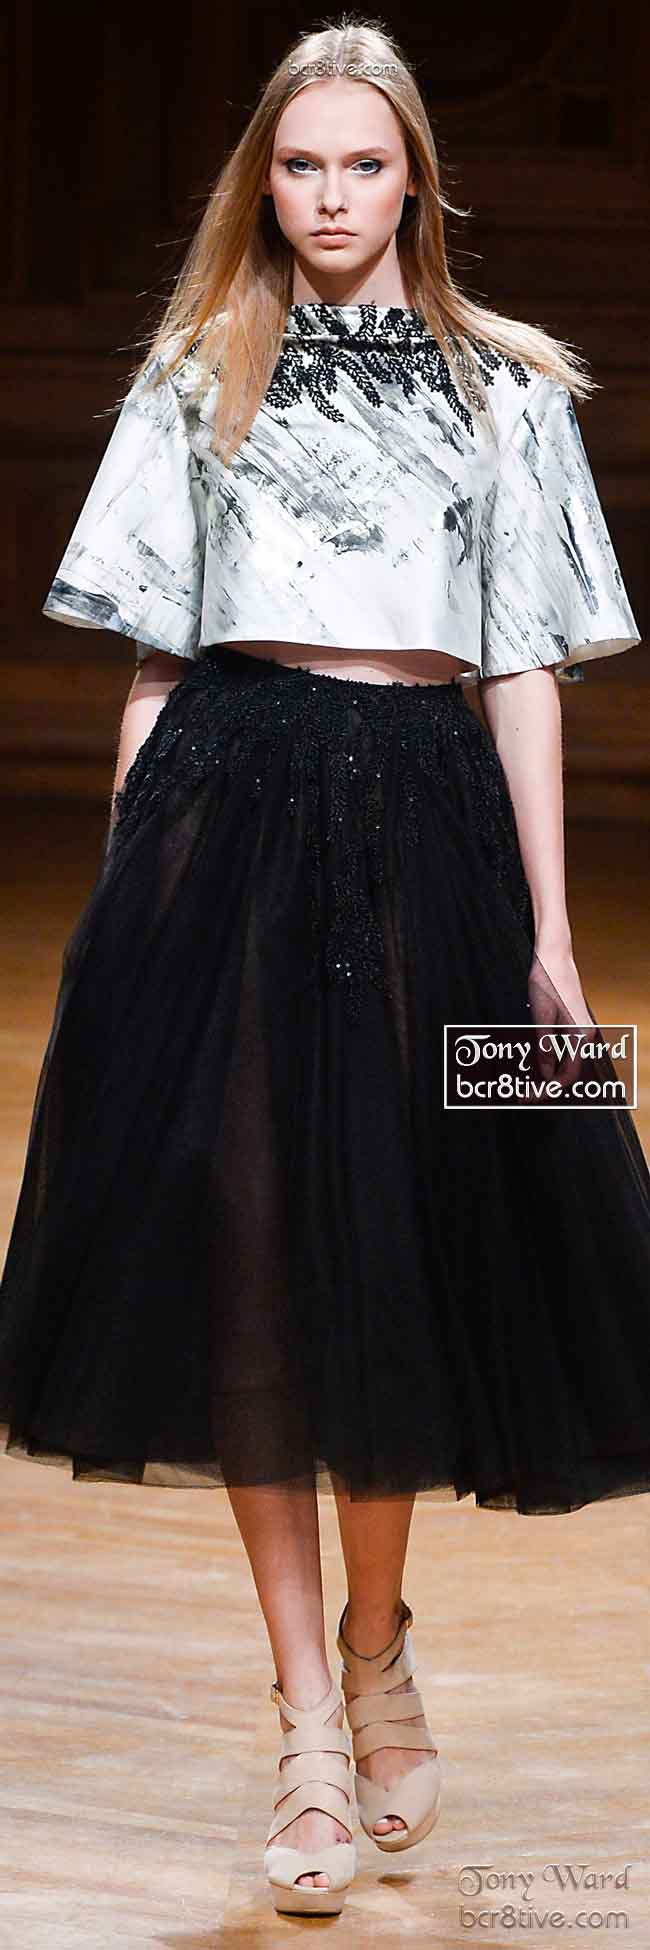 Mid Length Black Layered Skirt and Boxy Cropped Top